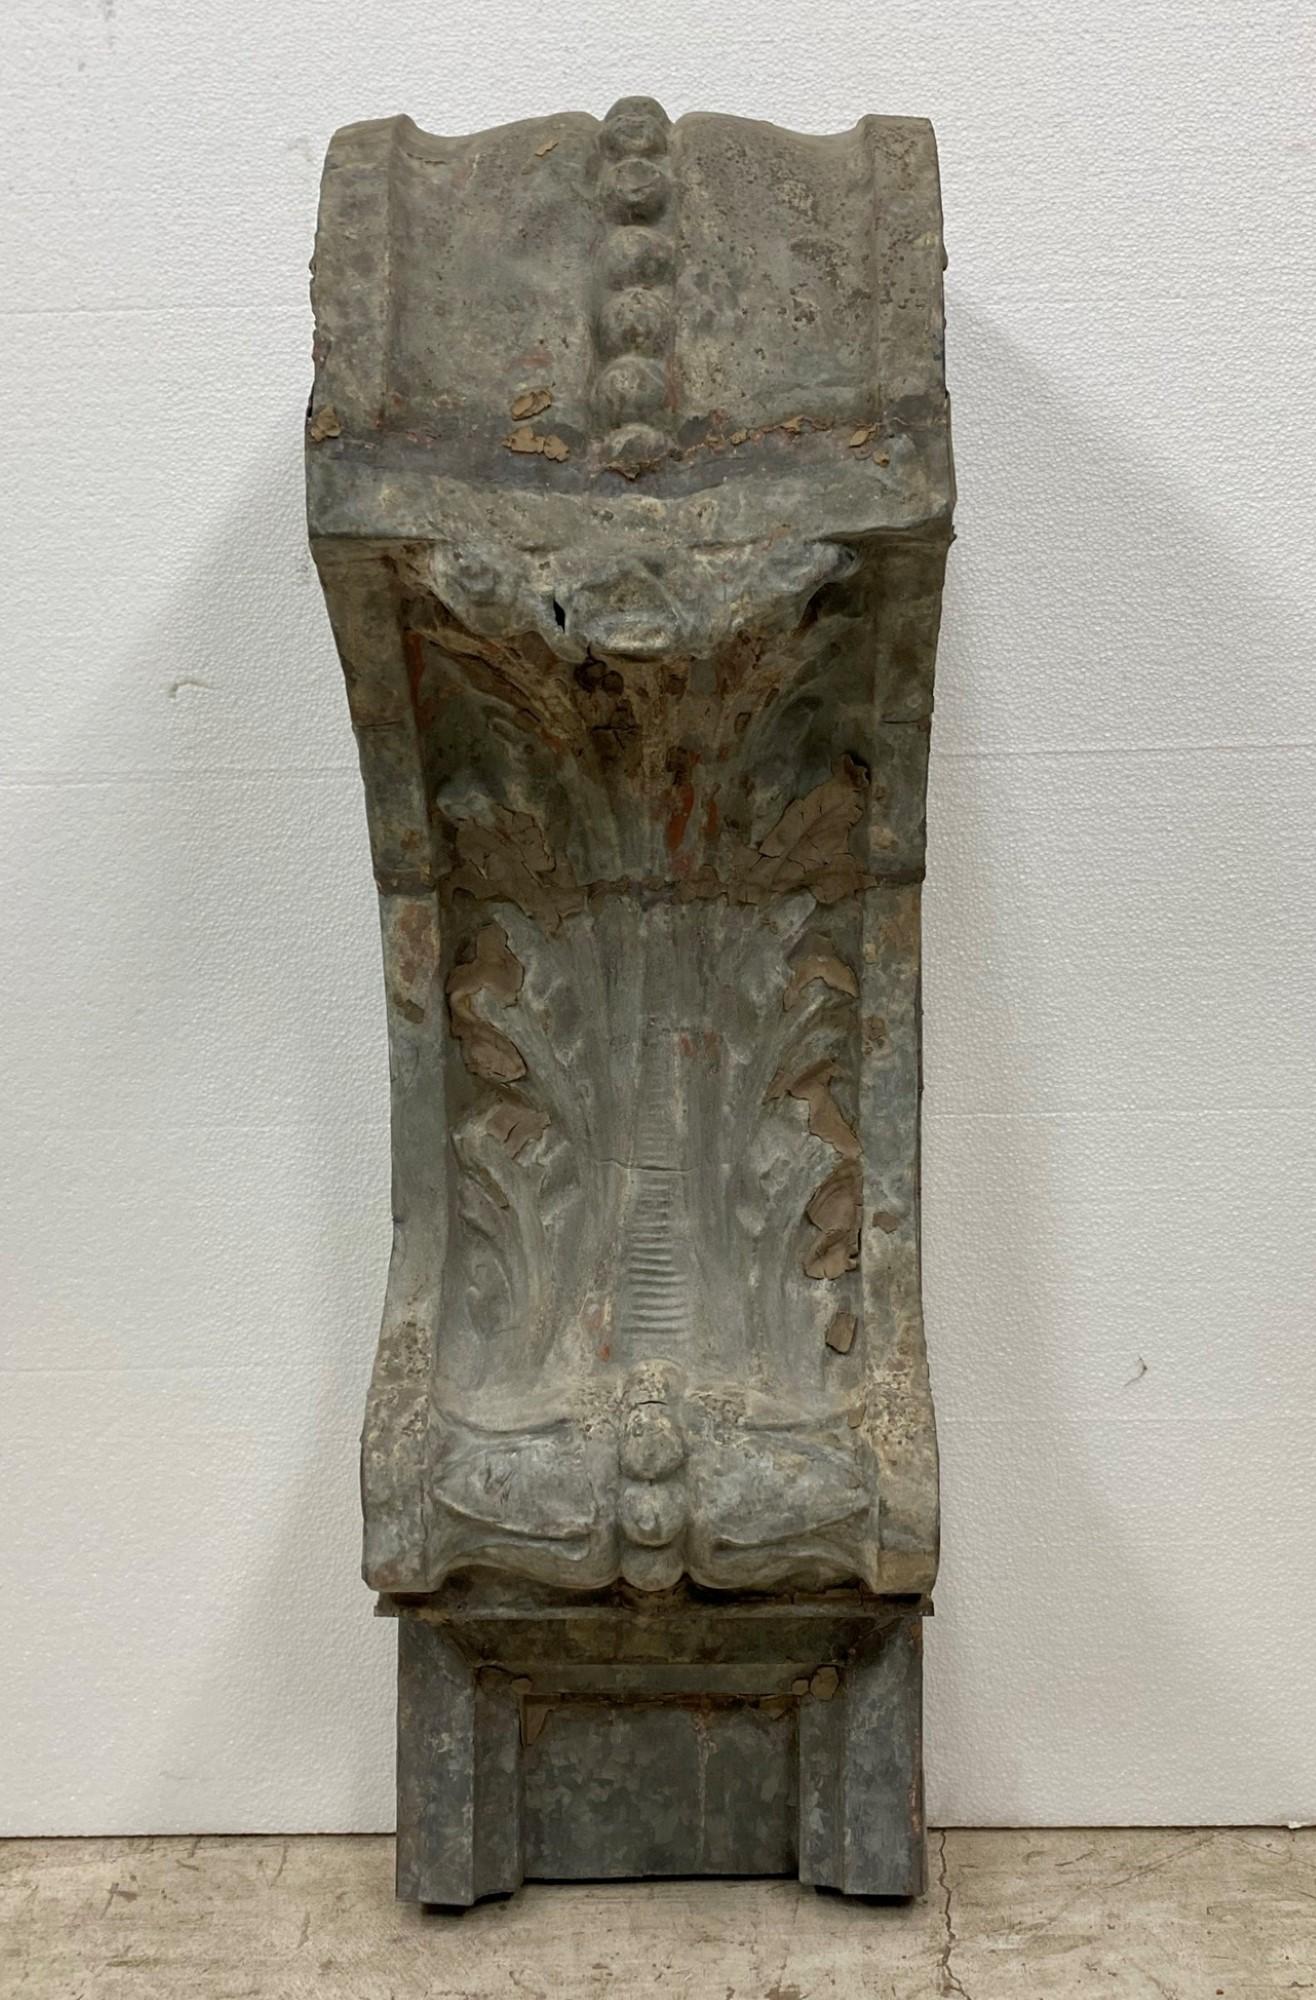 Zinc corbel done with a floral design retrieved from a turn of the century building facade. This is ready to hang on the wall. One available. This can be seen at our 400 Gilligan St location in Scranton, PA.